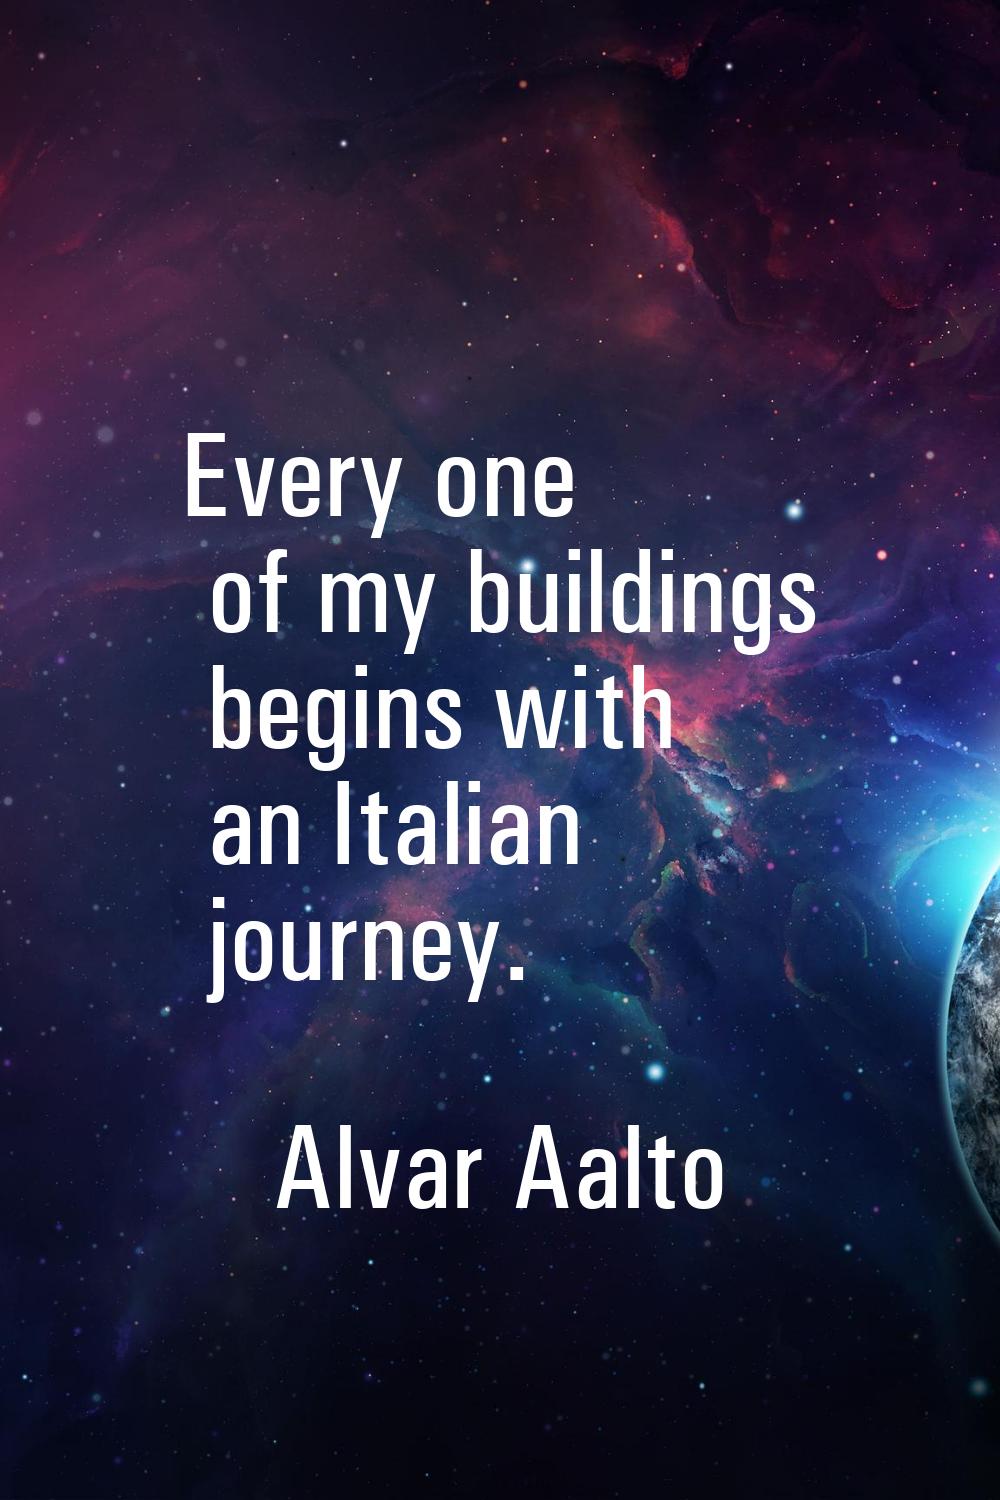 Every one of my buildings begins with an Italian journey.